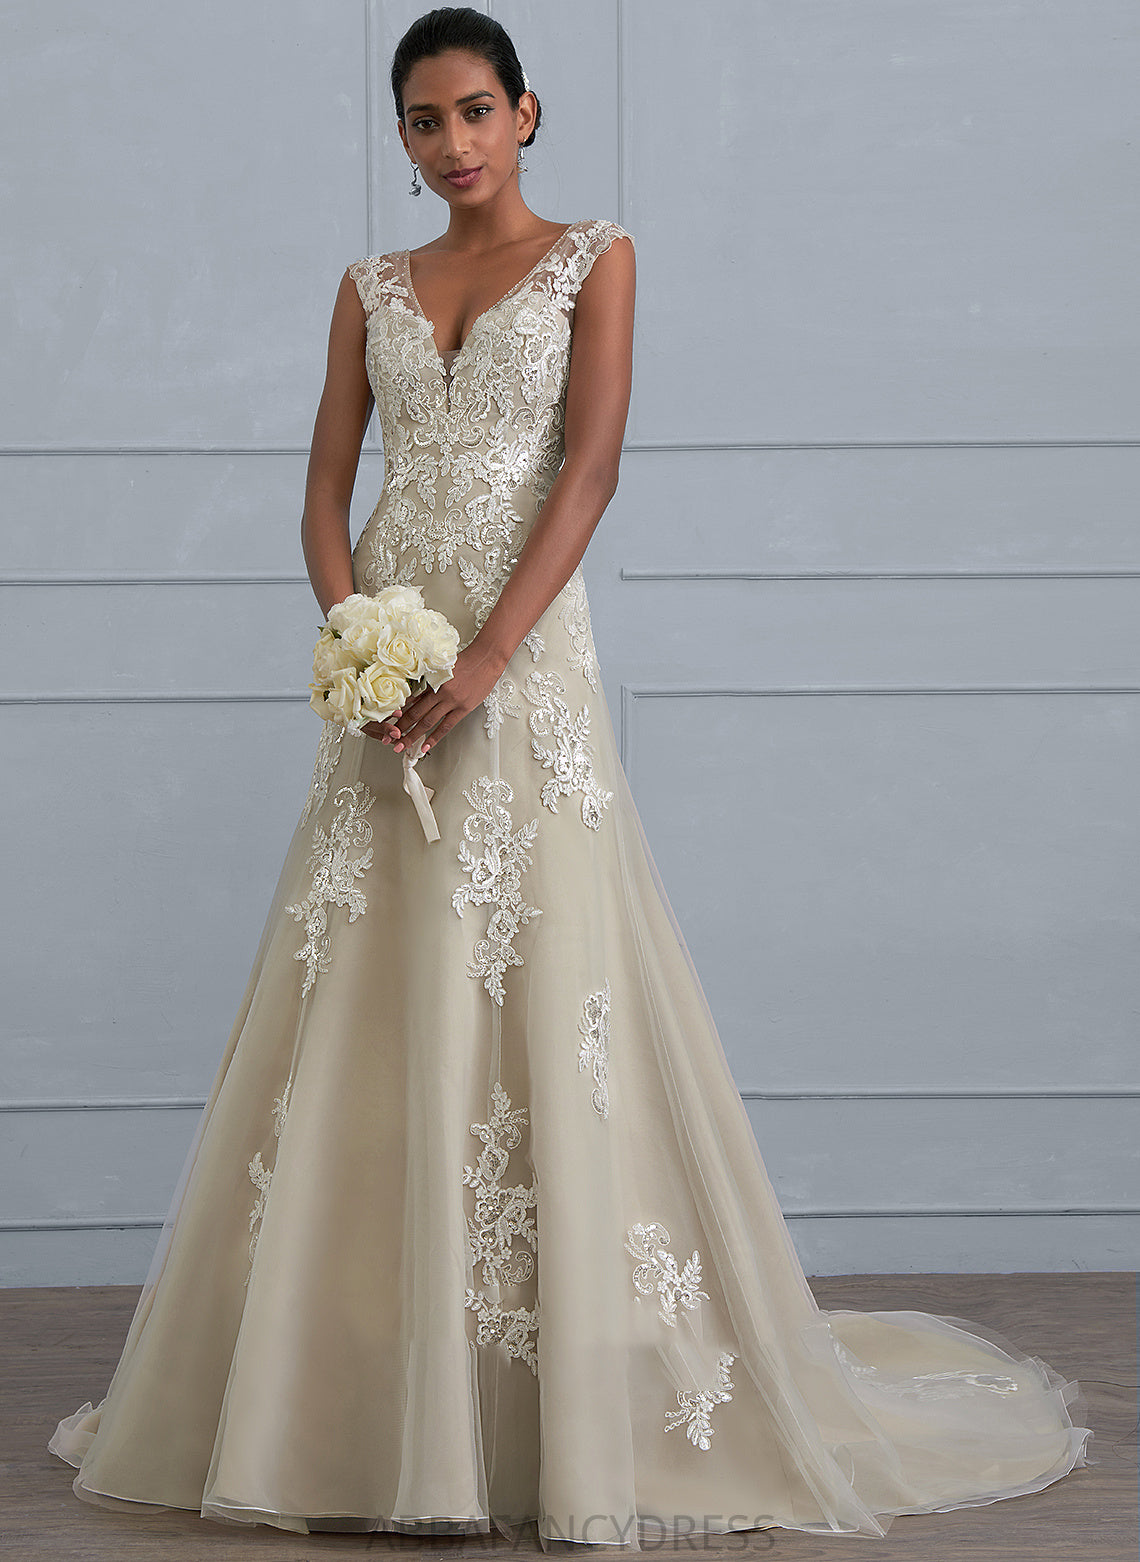 Wedding Dresses With Lace Ayanna Court Wedding Sequins A-Line Dress Train Tulle Beading V-neck